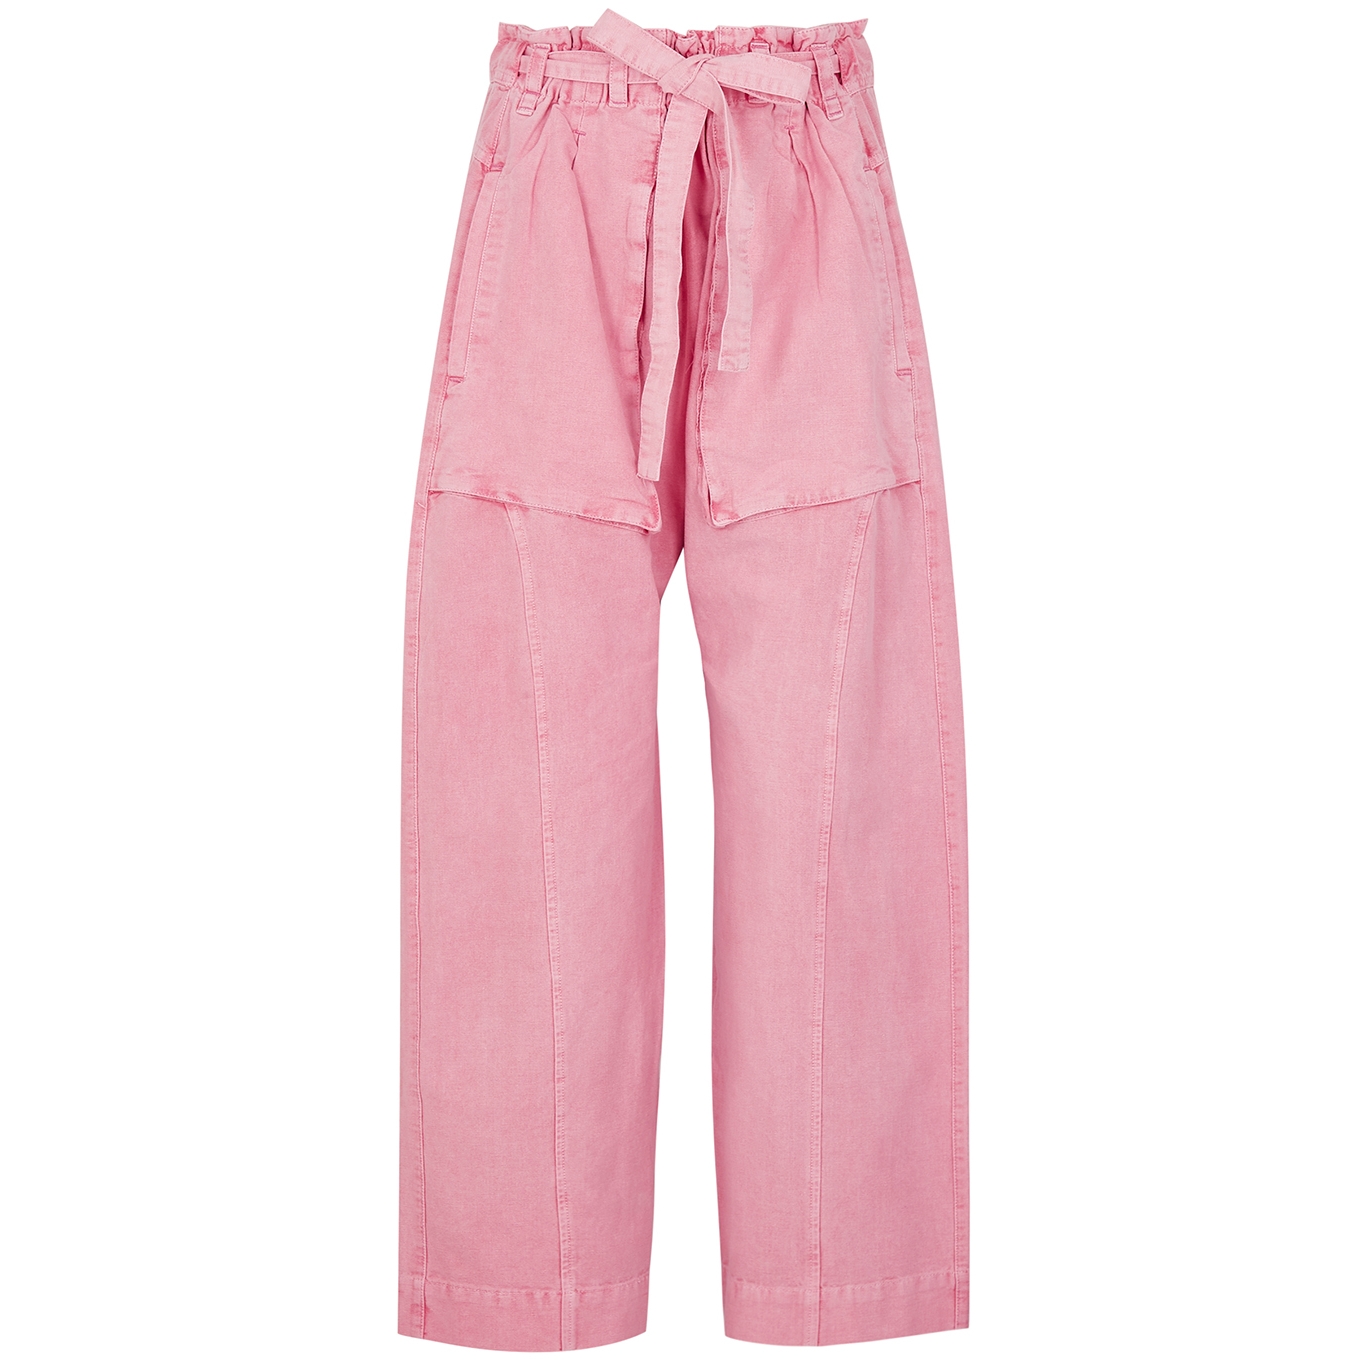 Free People Sky Rider Pink Cotton-blend Trousers - M